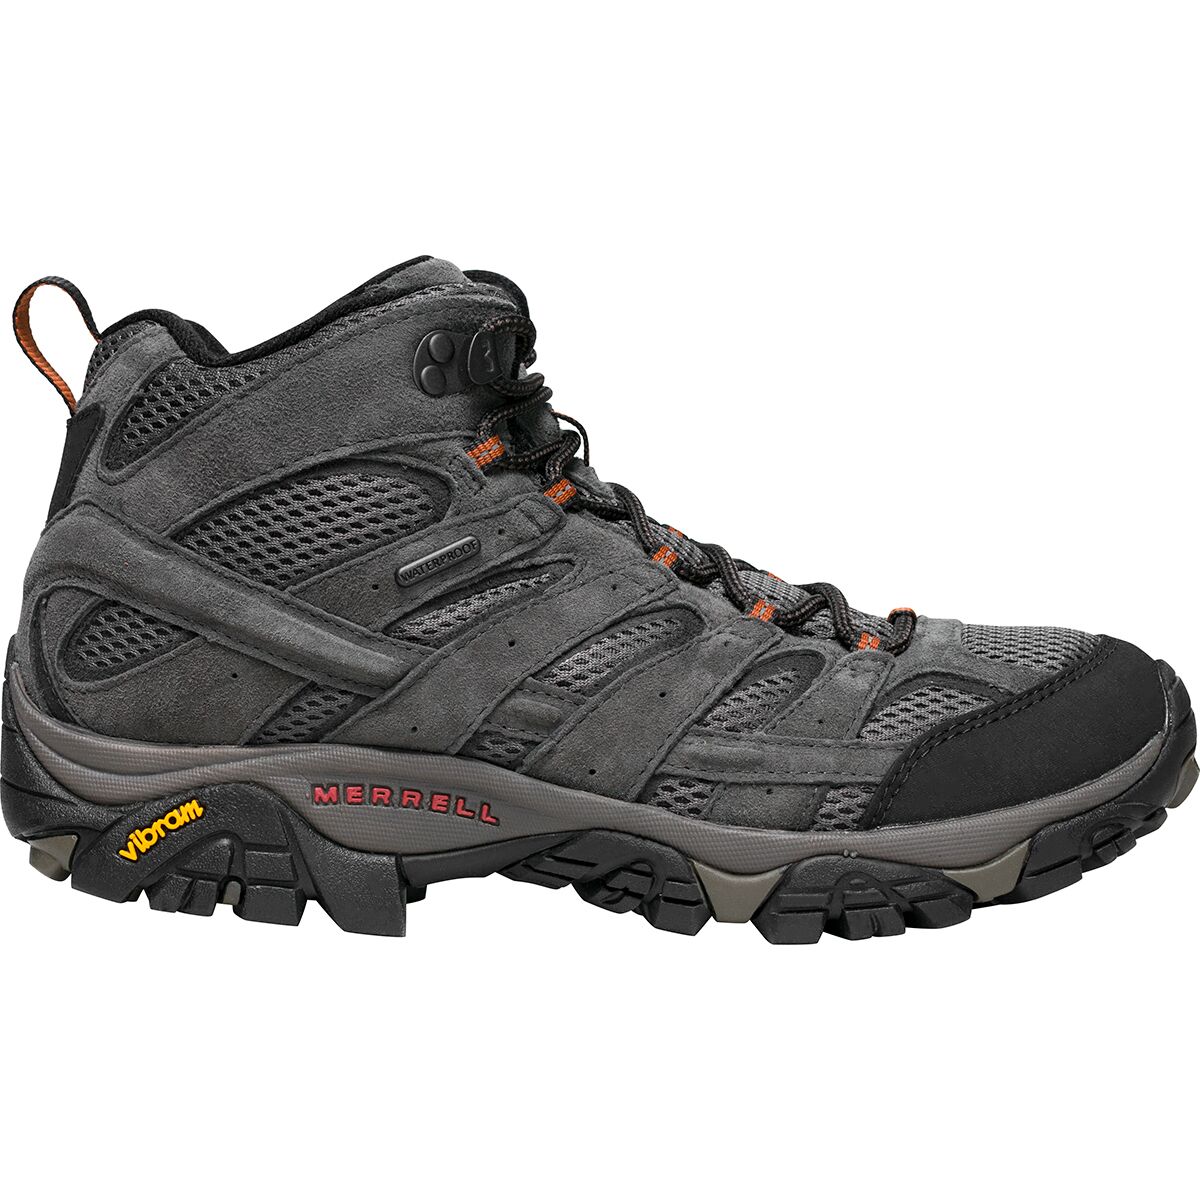 Merrell Moab Mid Waterproof Reviews - Trailspace